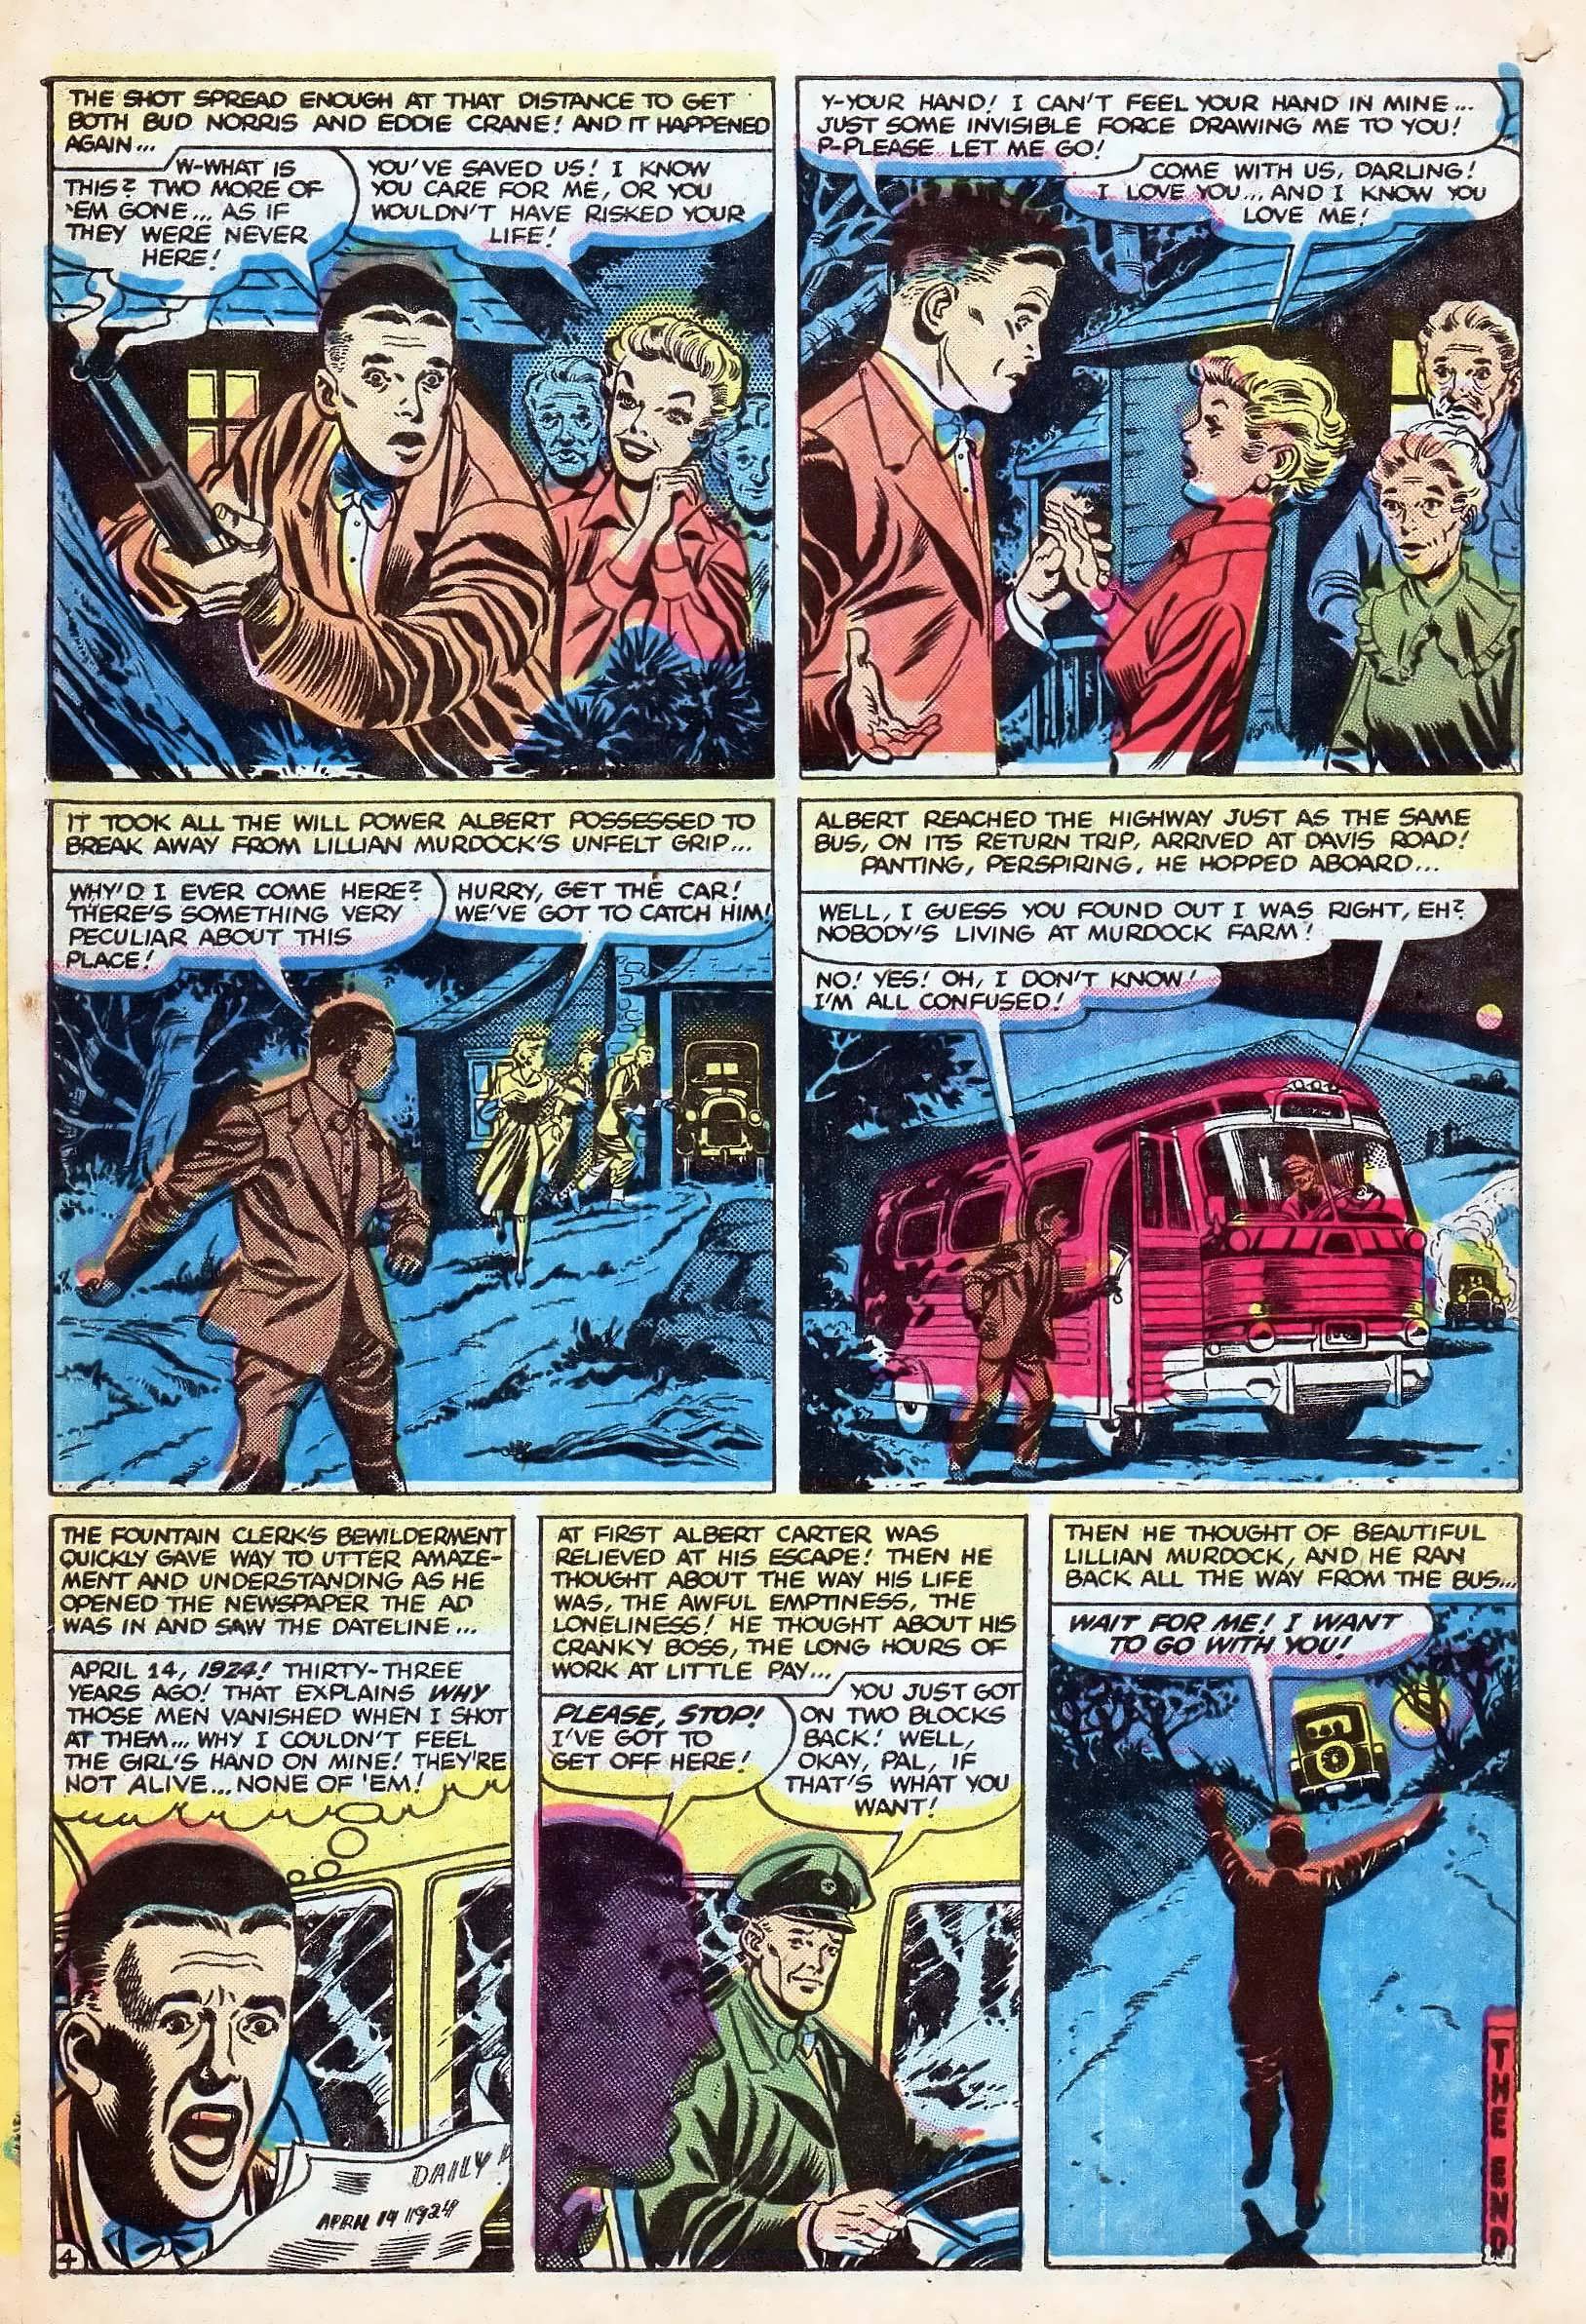 Marvel Tales (1949) 157 Page 5